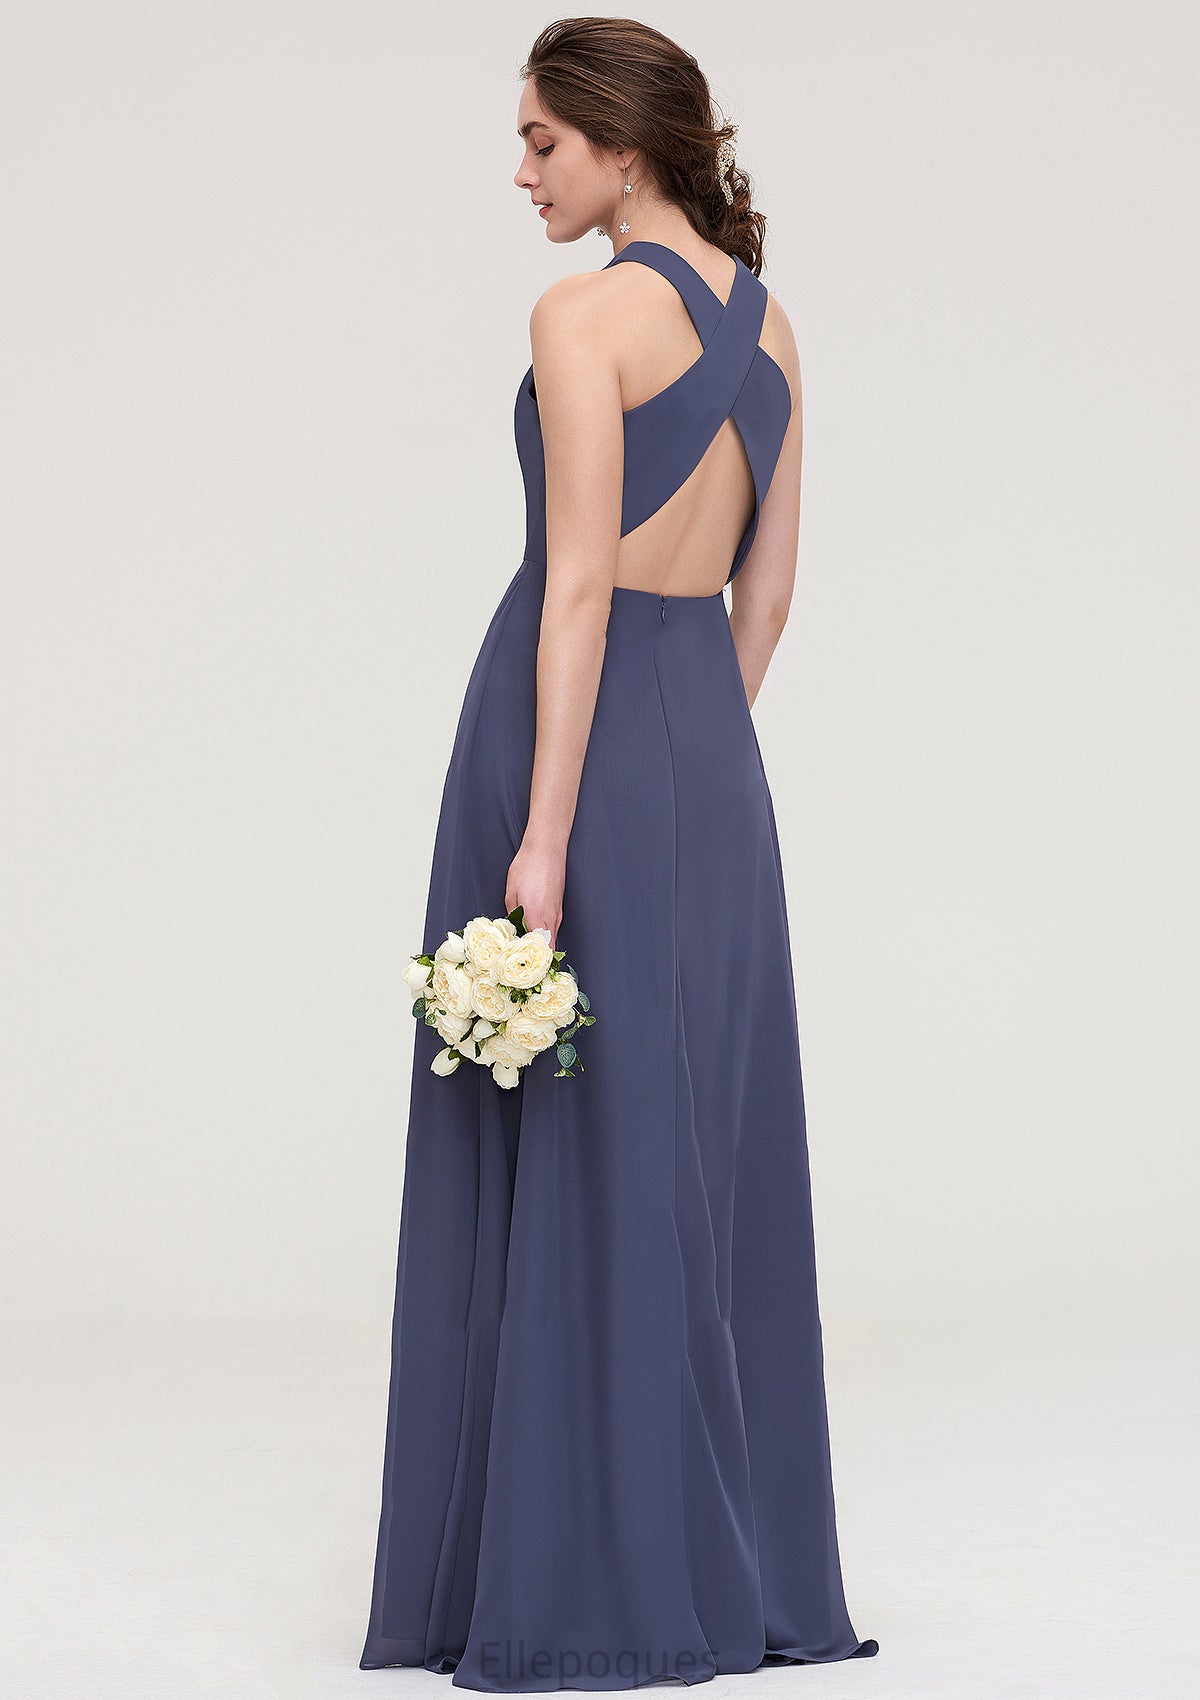 Sleeveless Scoop Neck ong/Floor-Length Chiffon A-line/Princess LStormy Bridesmaid Dresses With Pleated Mylie HOP0025470